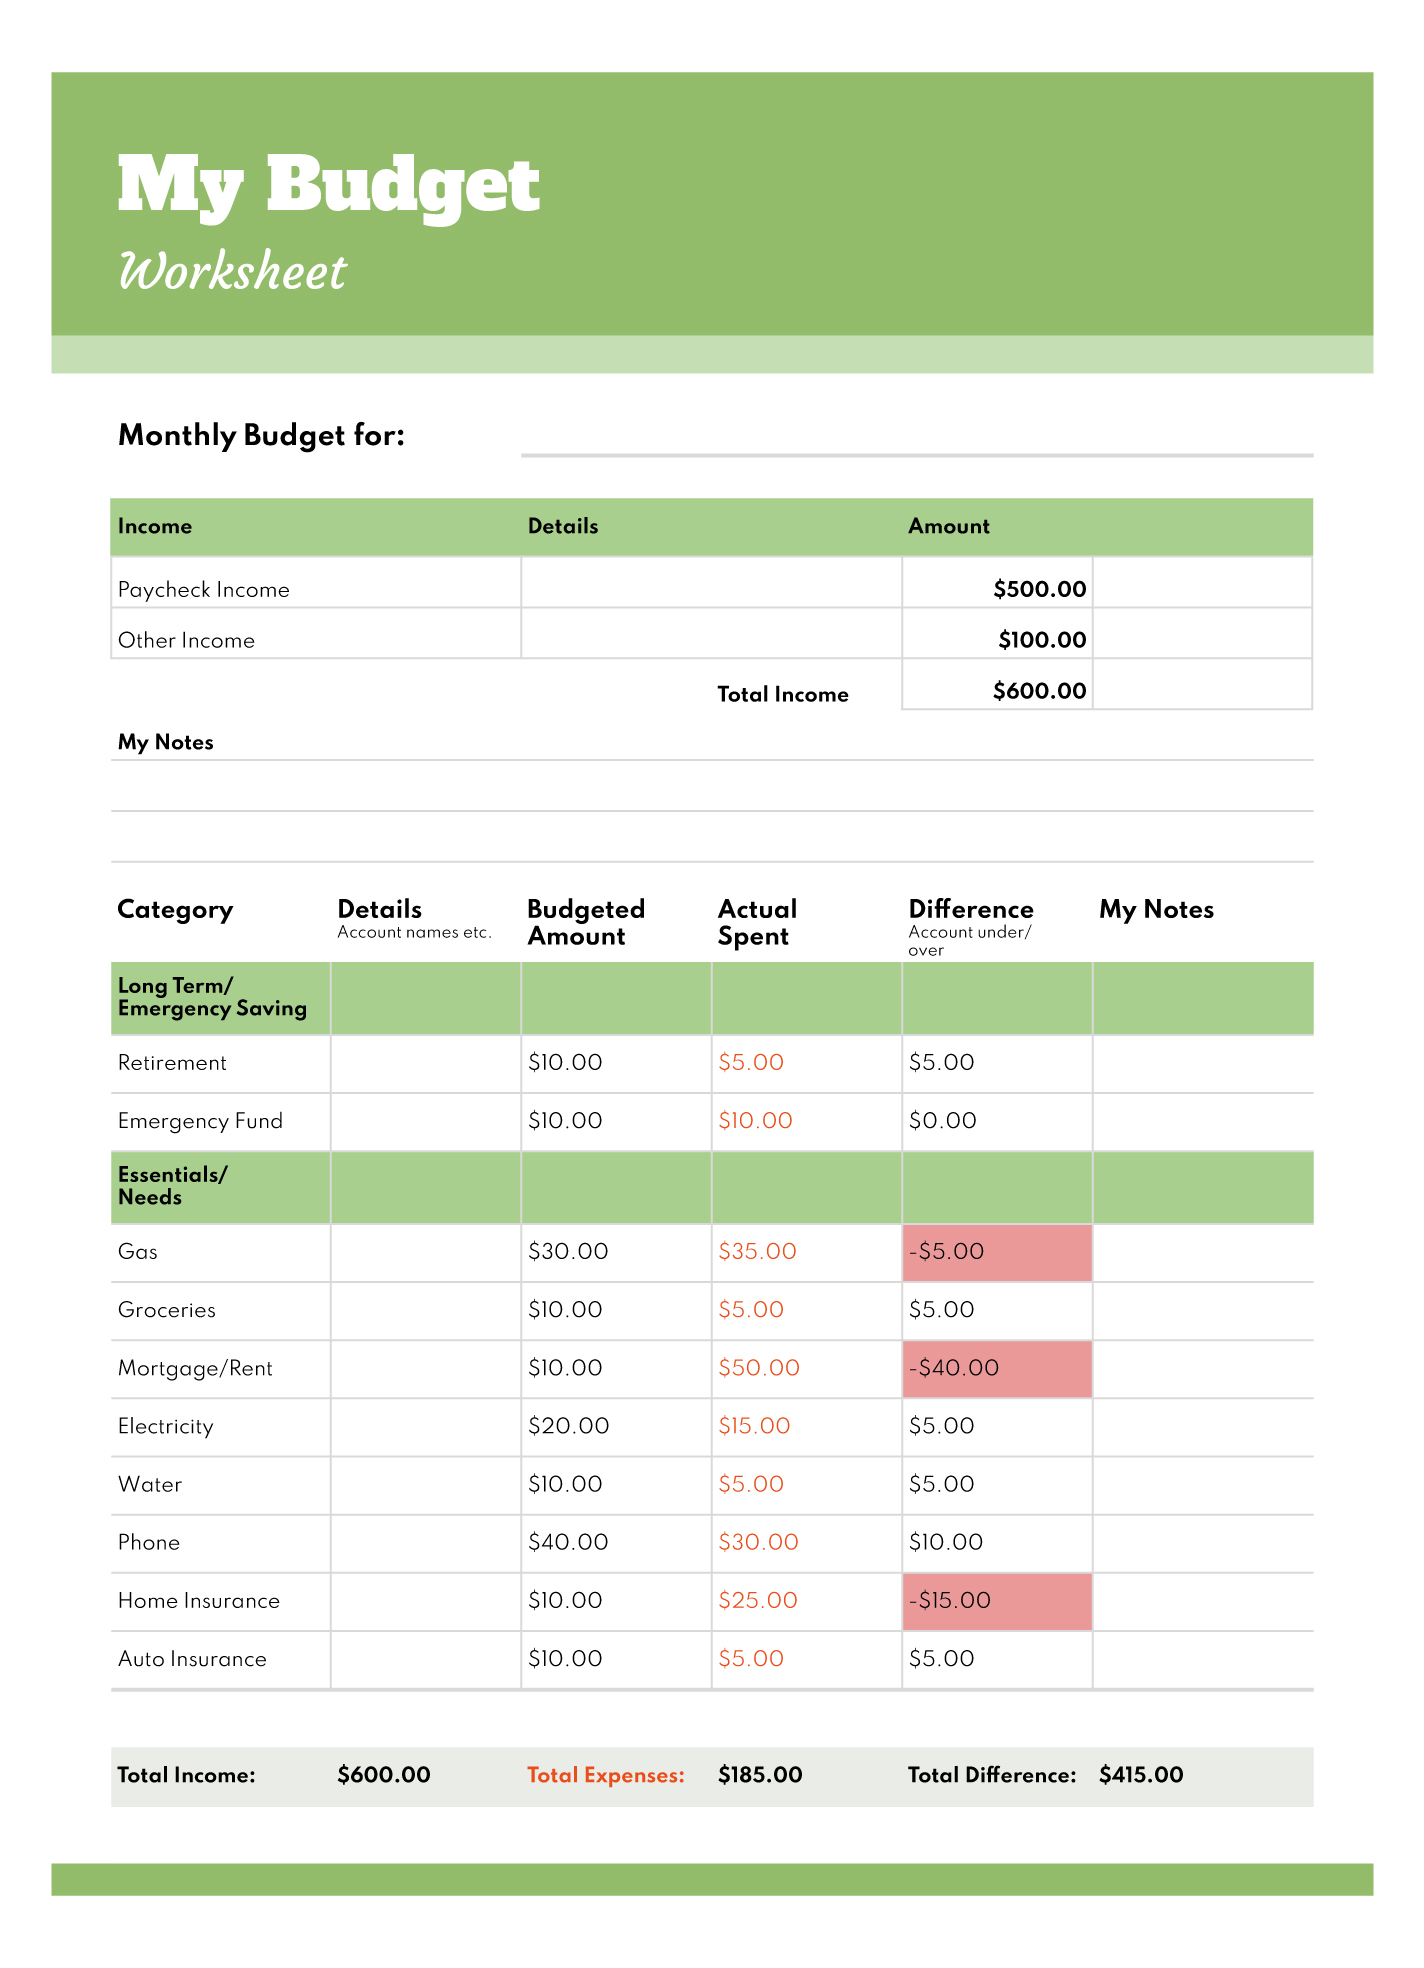 Budget Free Google Sheets & Excel Template gdoc.io